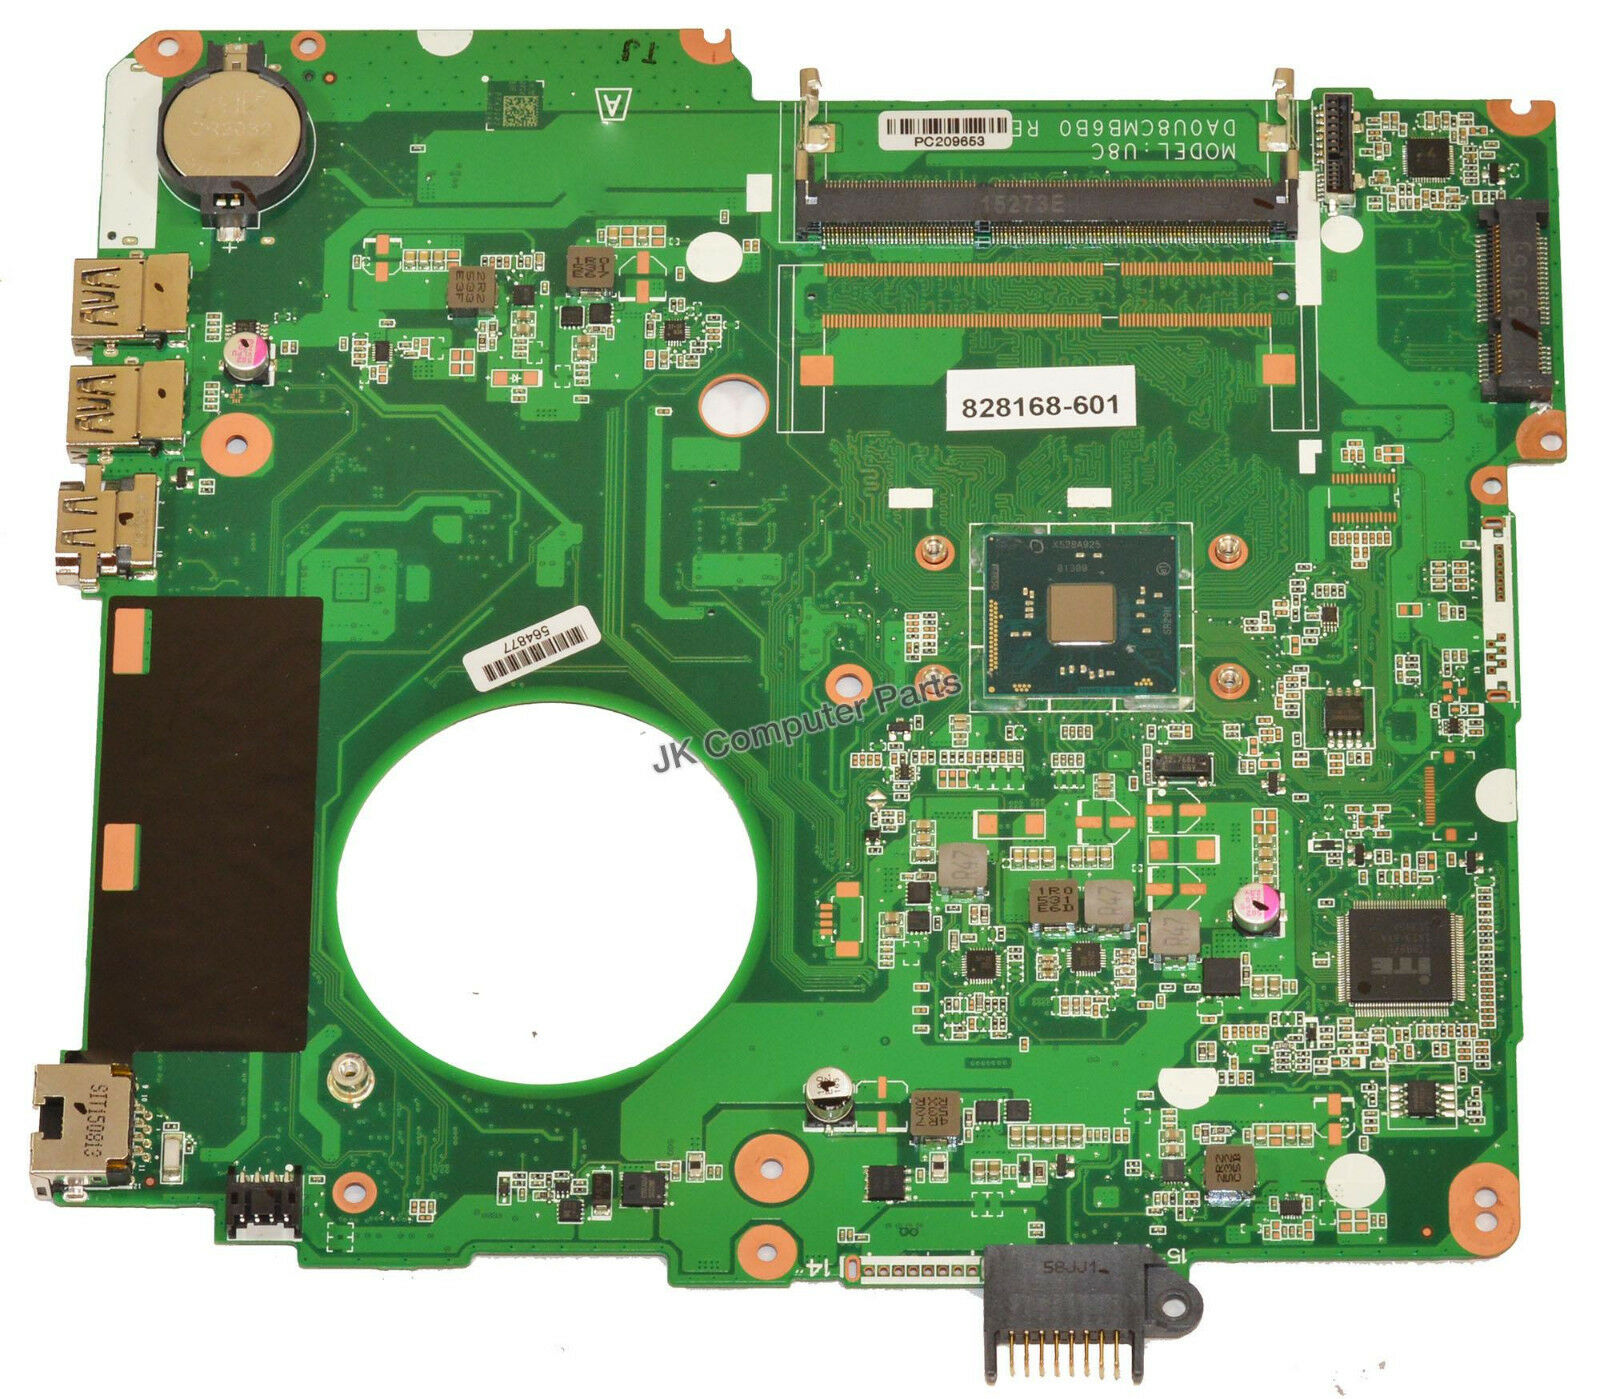 HP 15-F Laptop Motherboard w/ Intel Celeron N3050 1.6Ghz CPU 828168-601 This motherboard is pulled from a ne